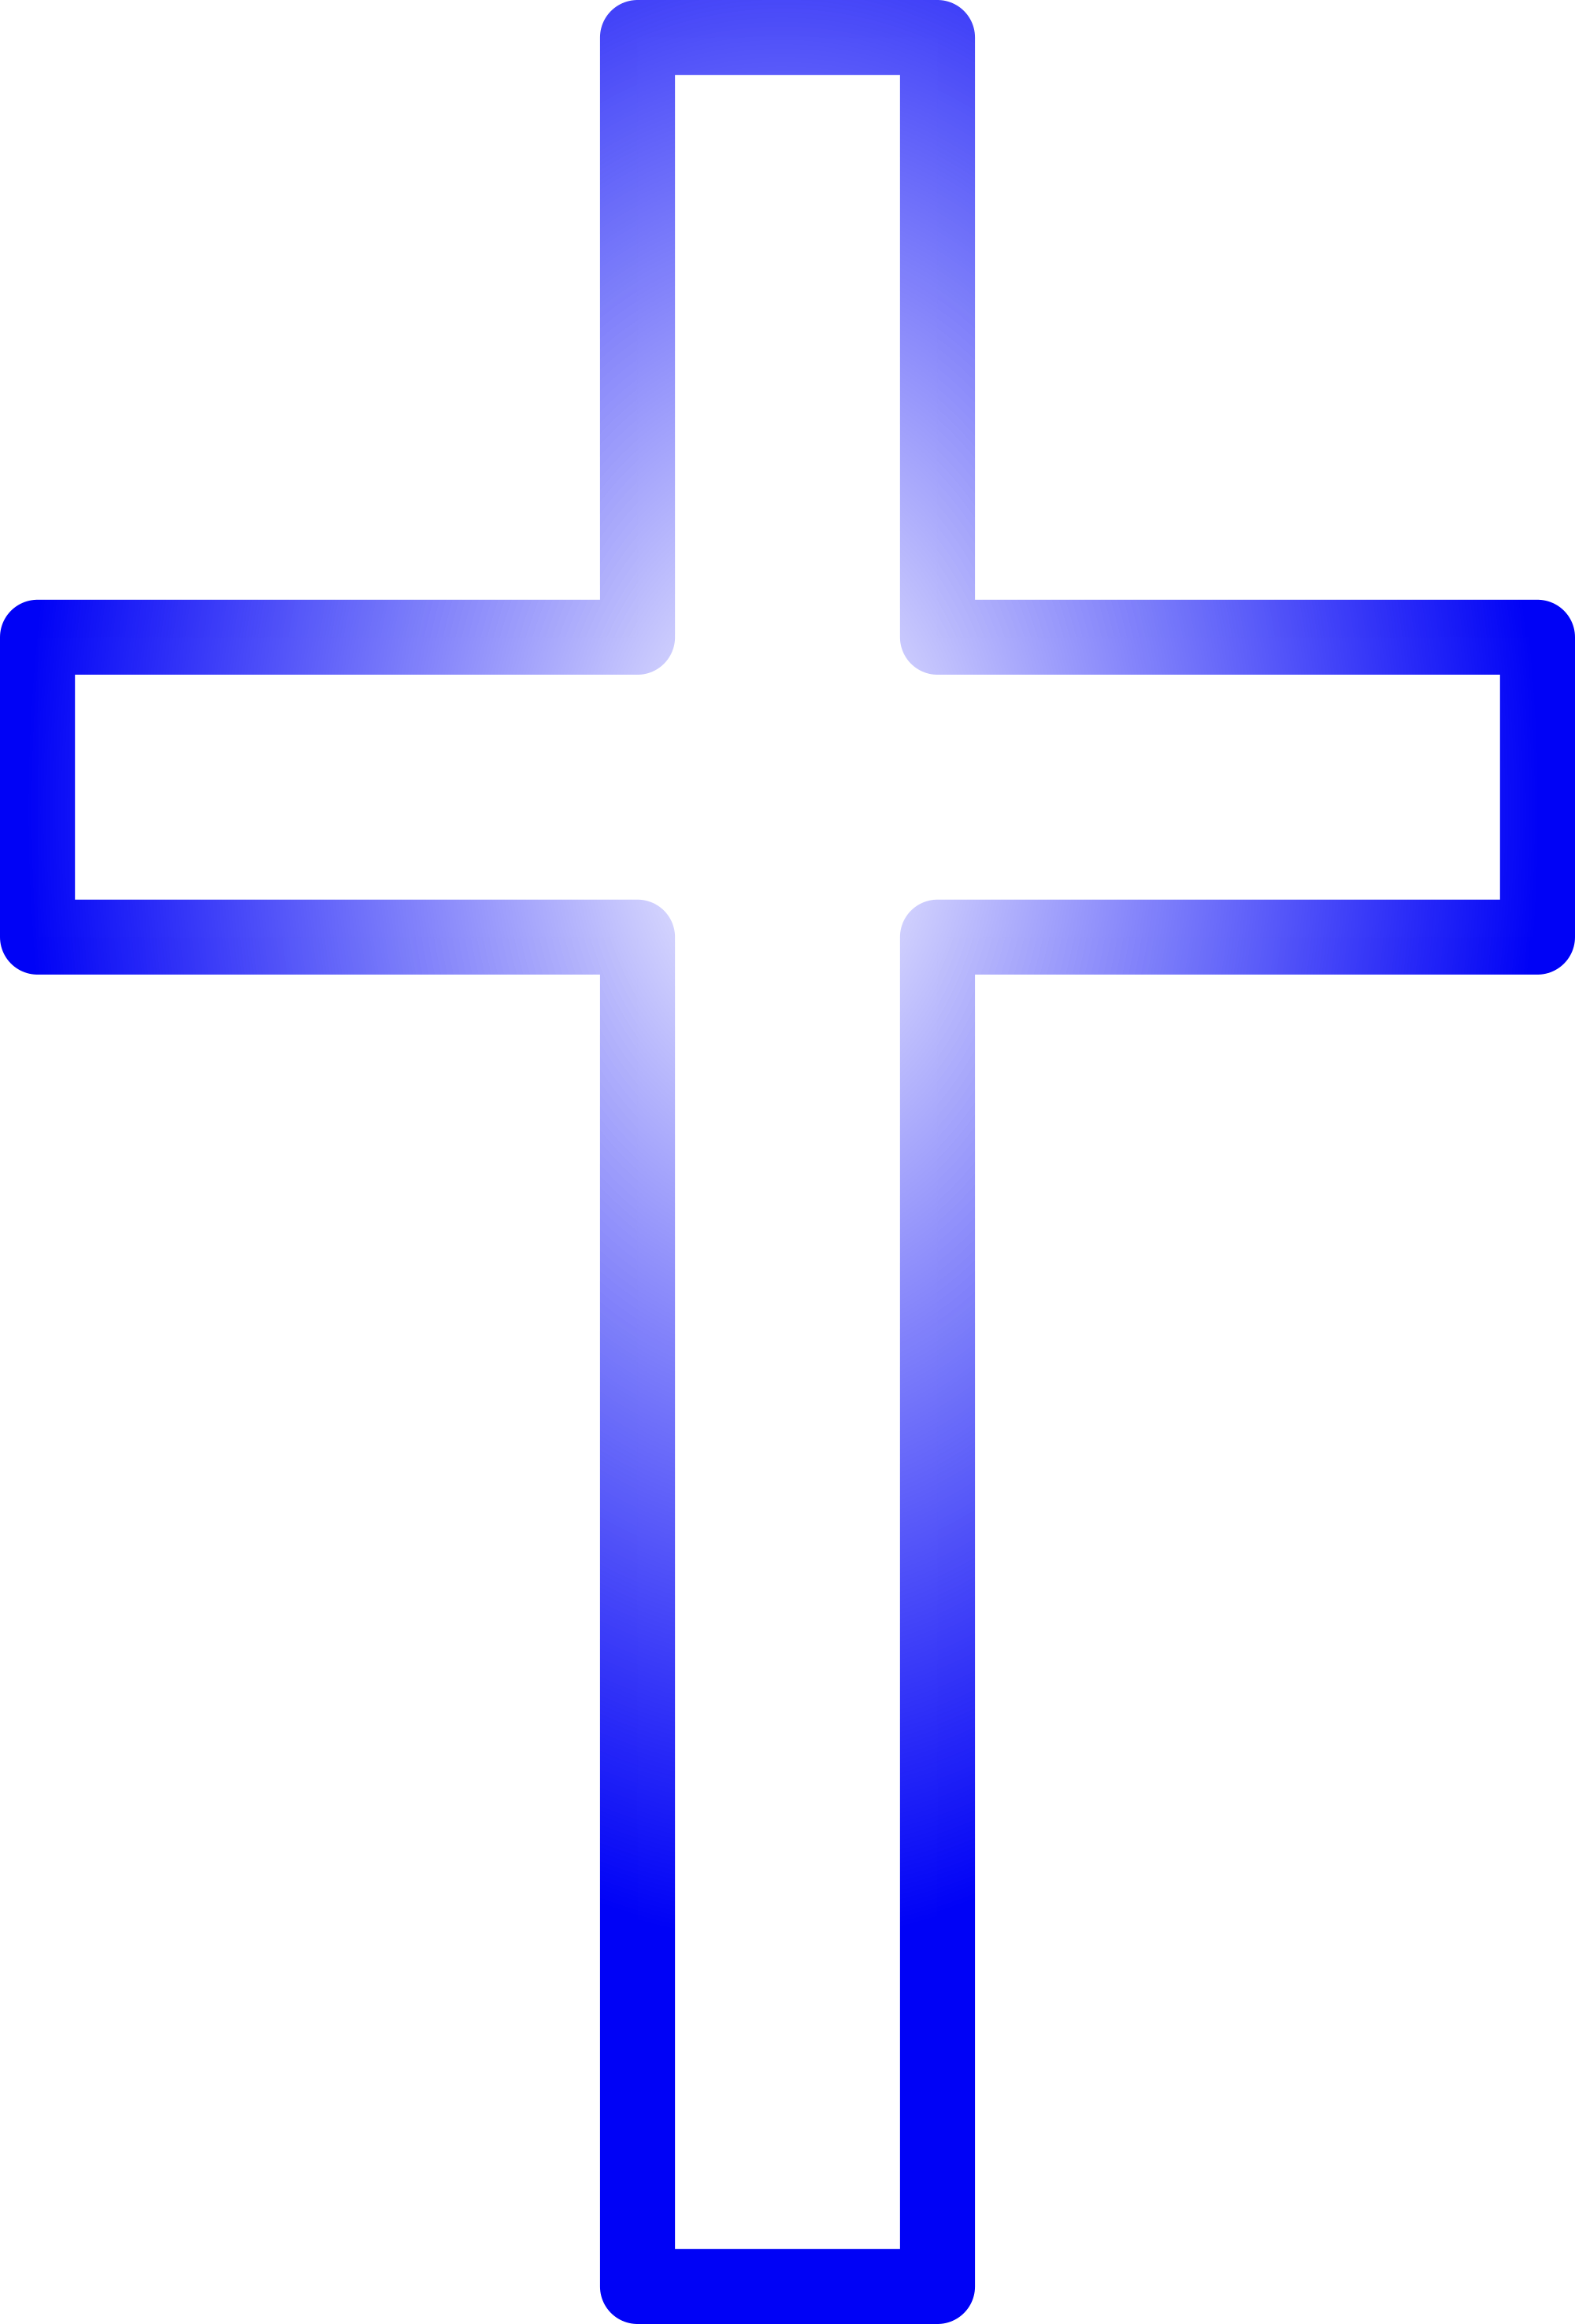 File:Blue-cross-outline.svg - Wikimedia Commons